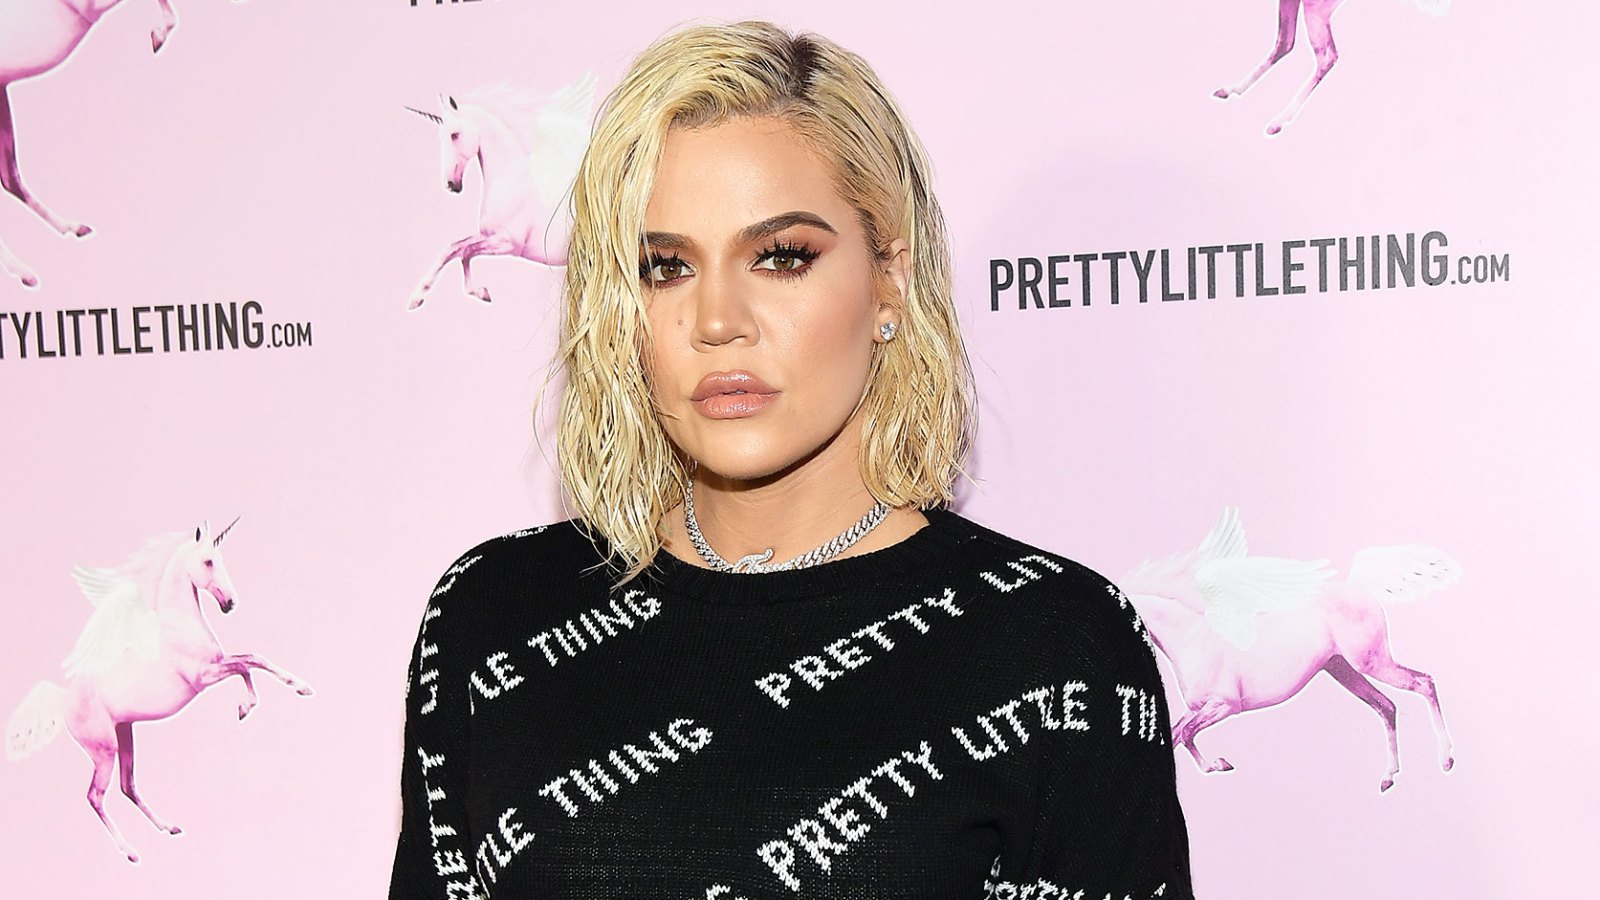 Khloe Kardashian attends the PrettyLittleThing LA Office Opening Party Not Live-Tweeting KUWTK Episode with Tristan Thompson Scandal